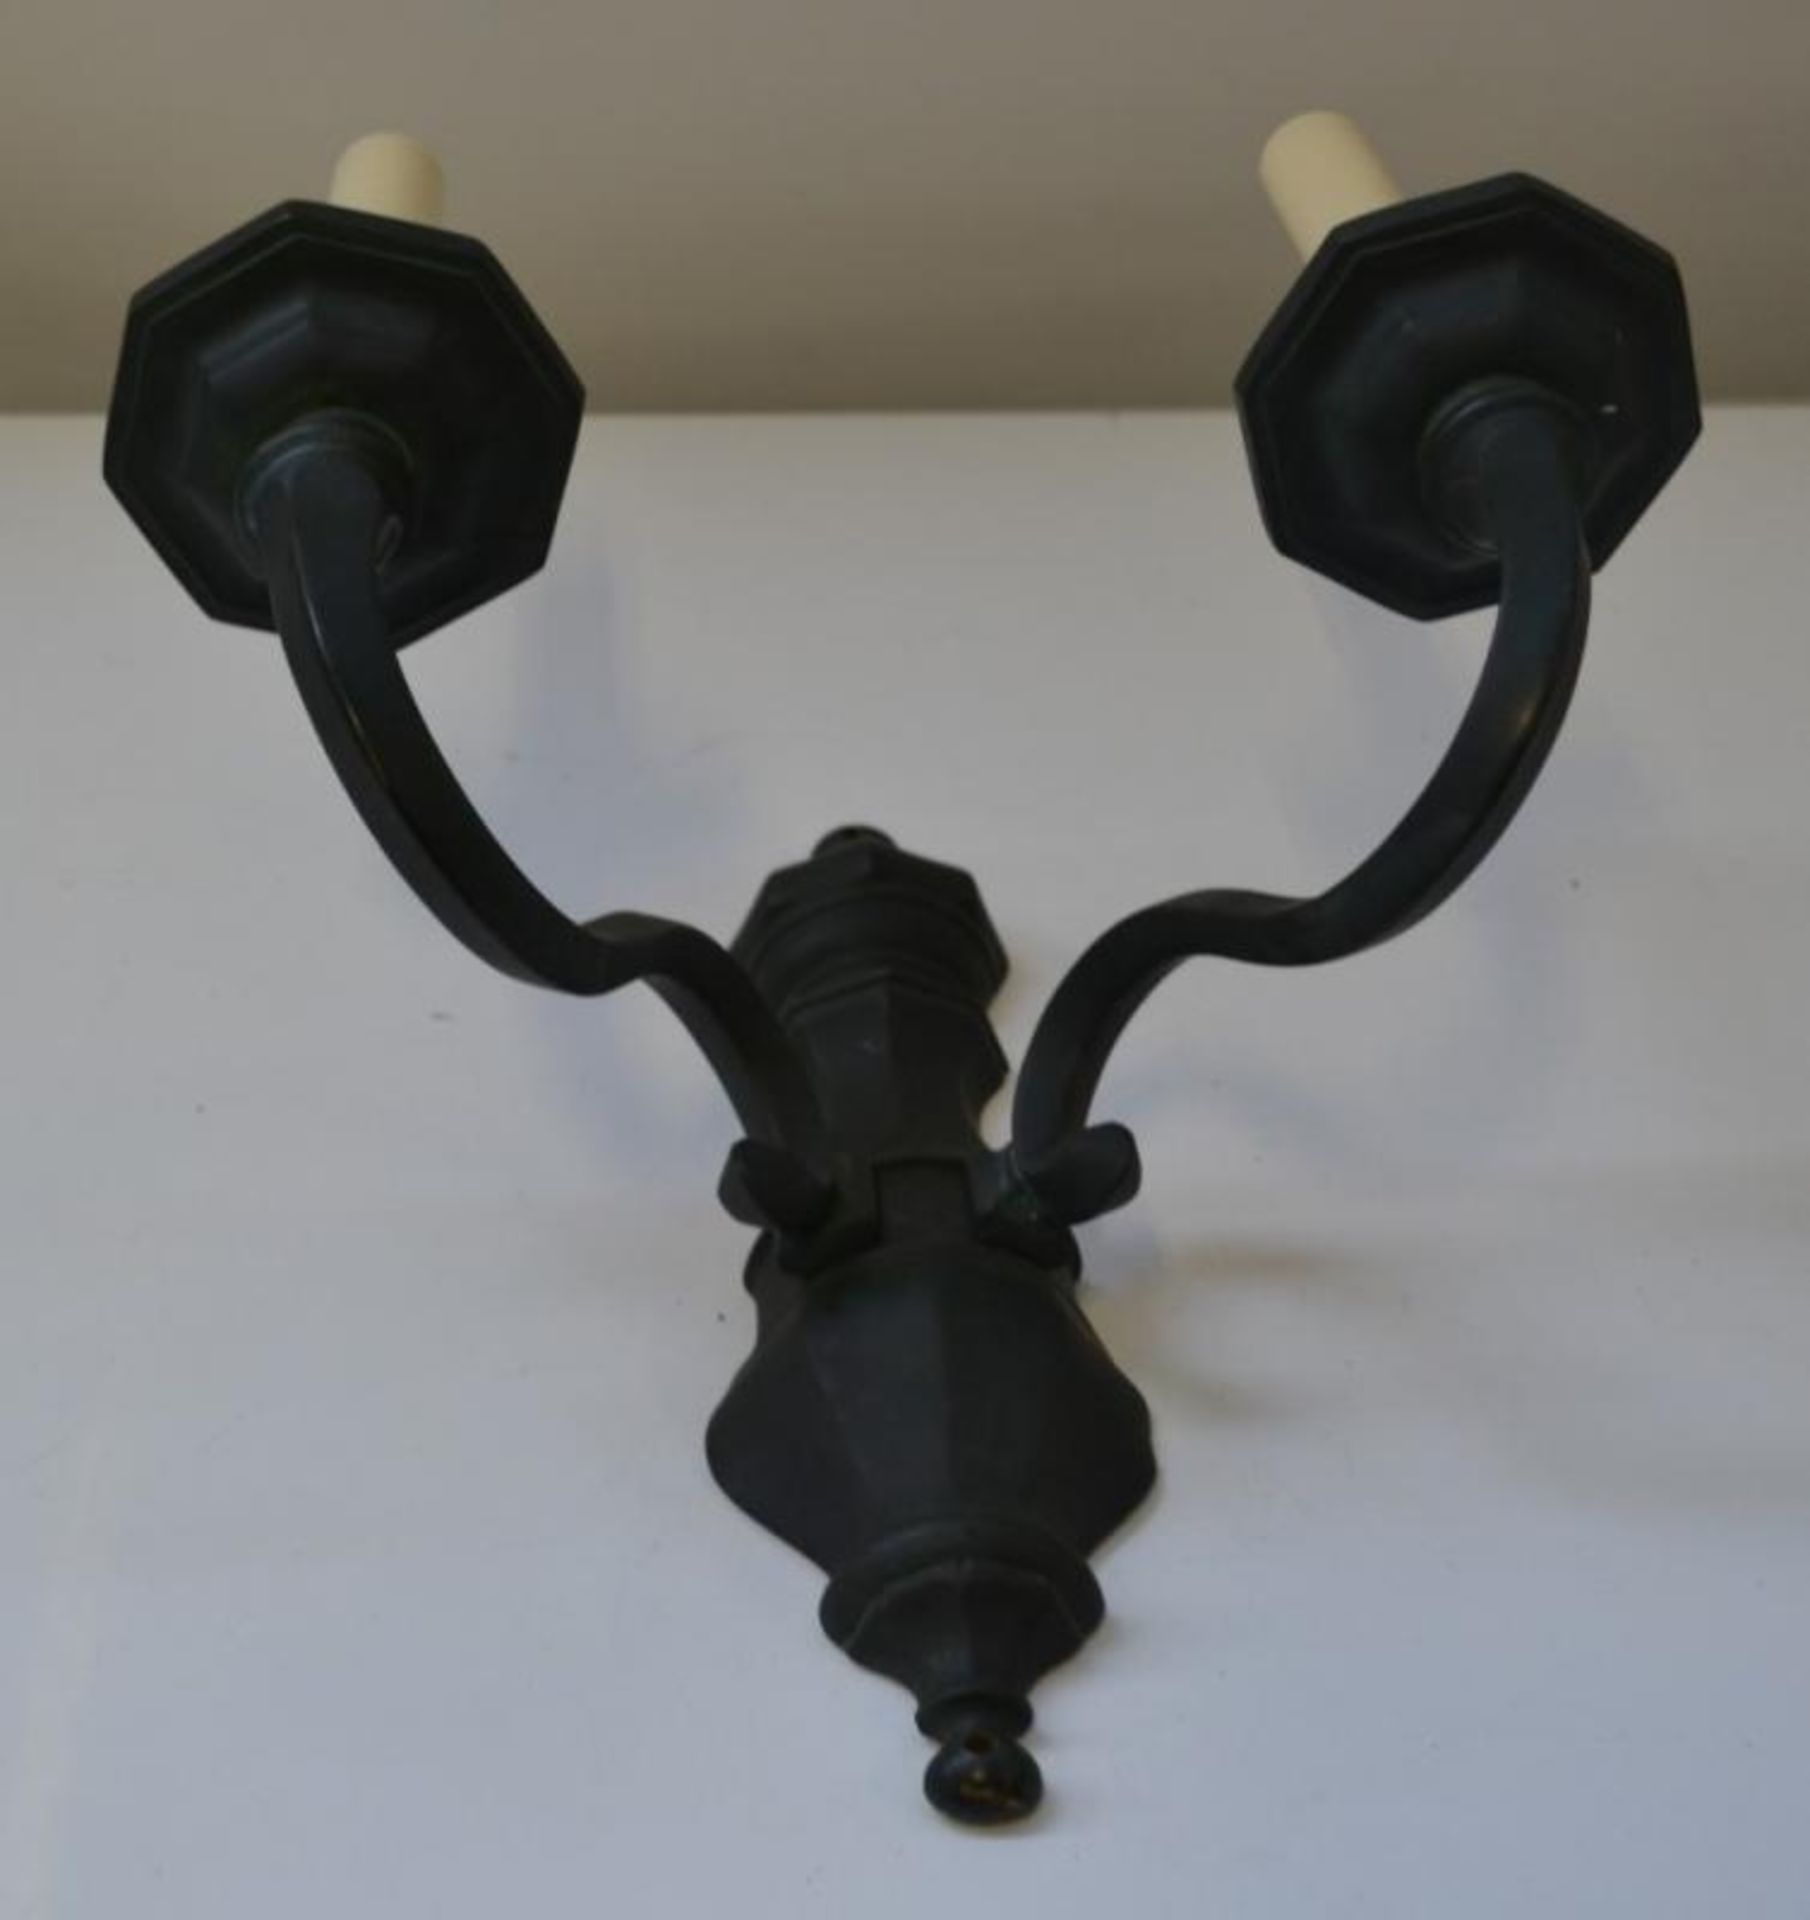 1 x CHELSOM Ornate Wall Light Fitting In Black - Dimensions: H32/L32cm - New/Unused boxed stock - CL